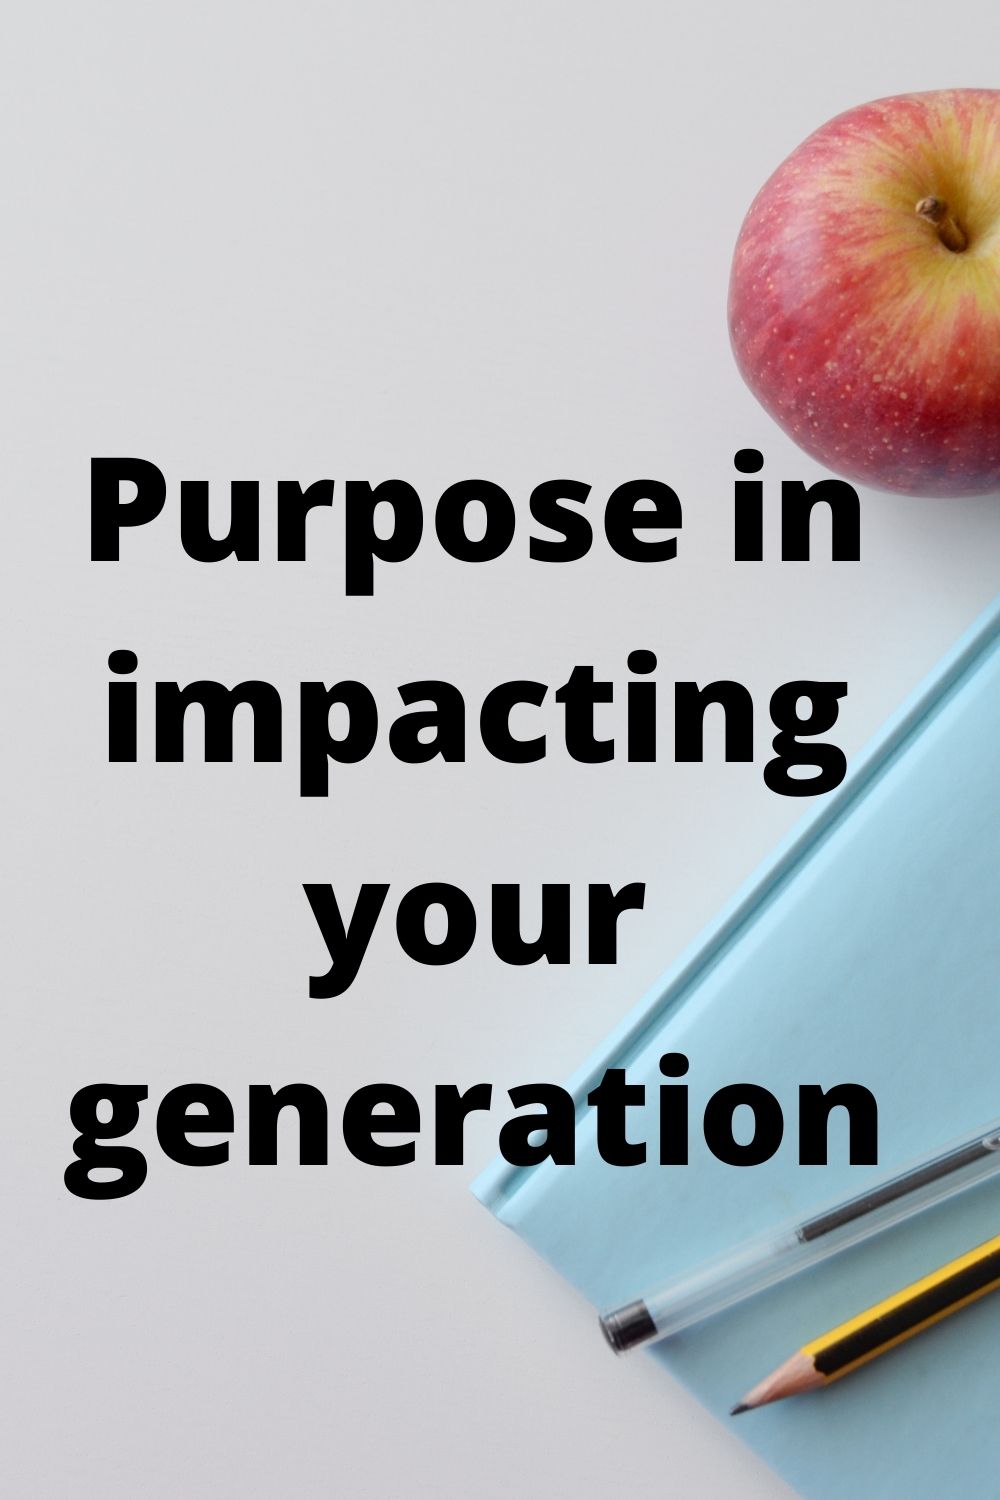 You can: Purpose in impacting your generation